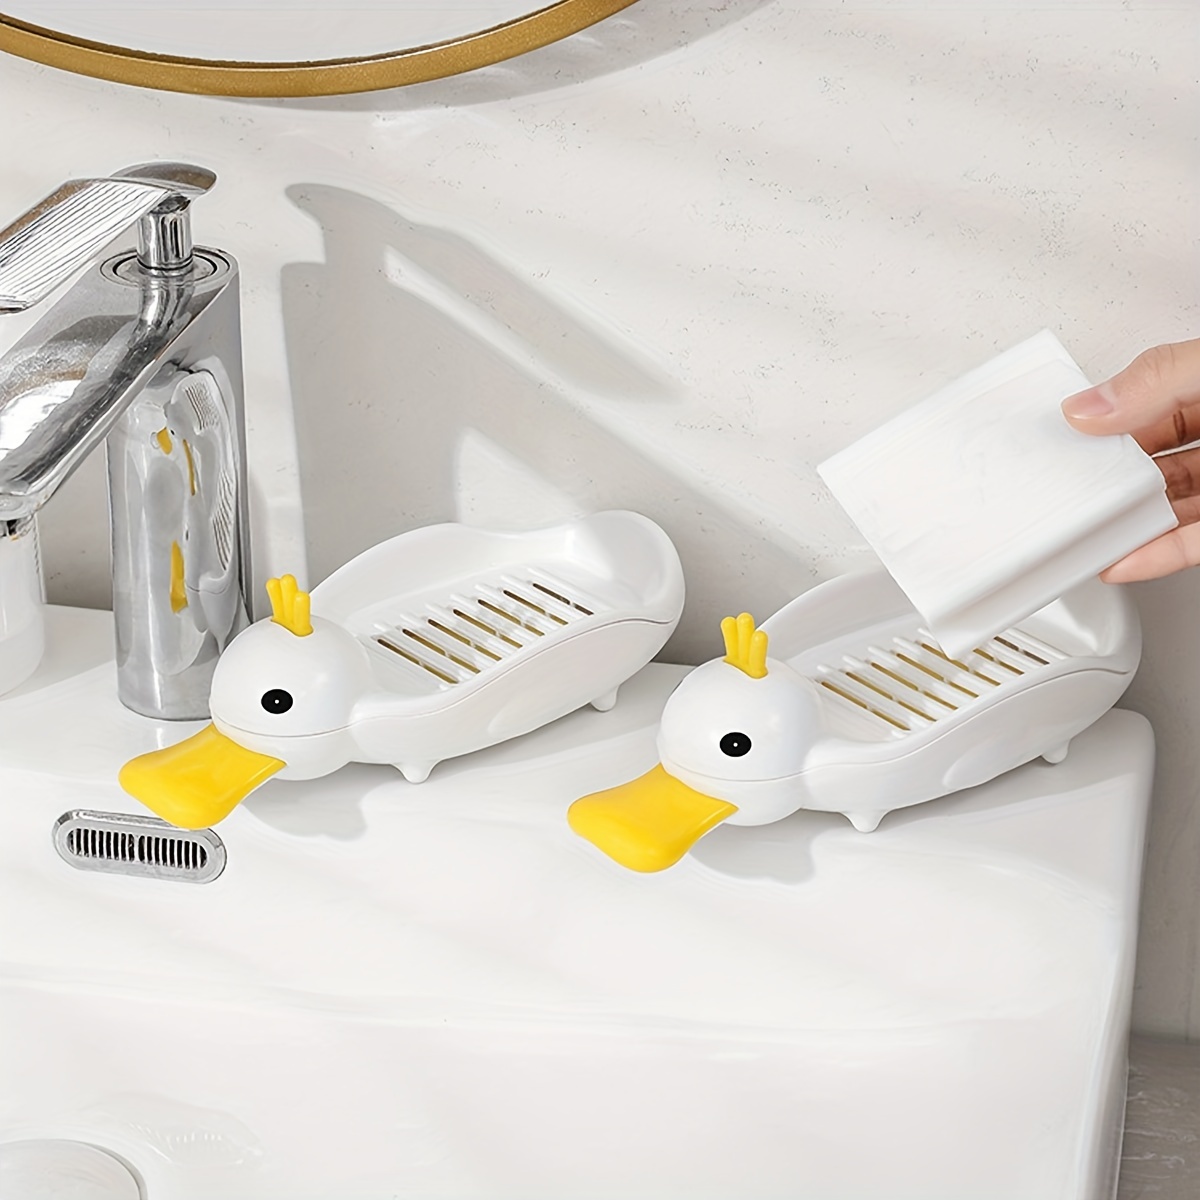 1pc White Duck-shaped Soap Dish For Bathroom